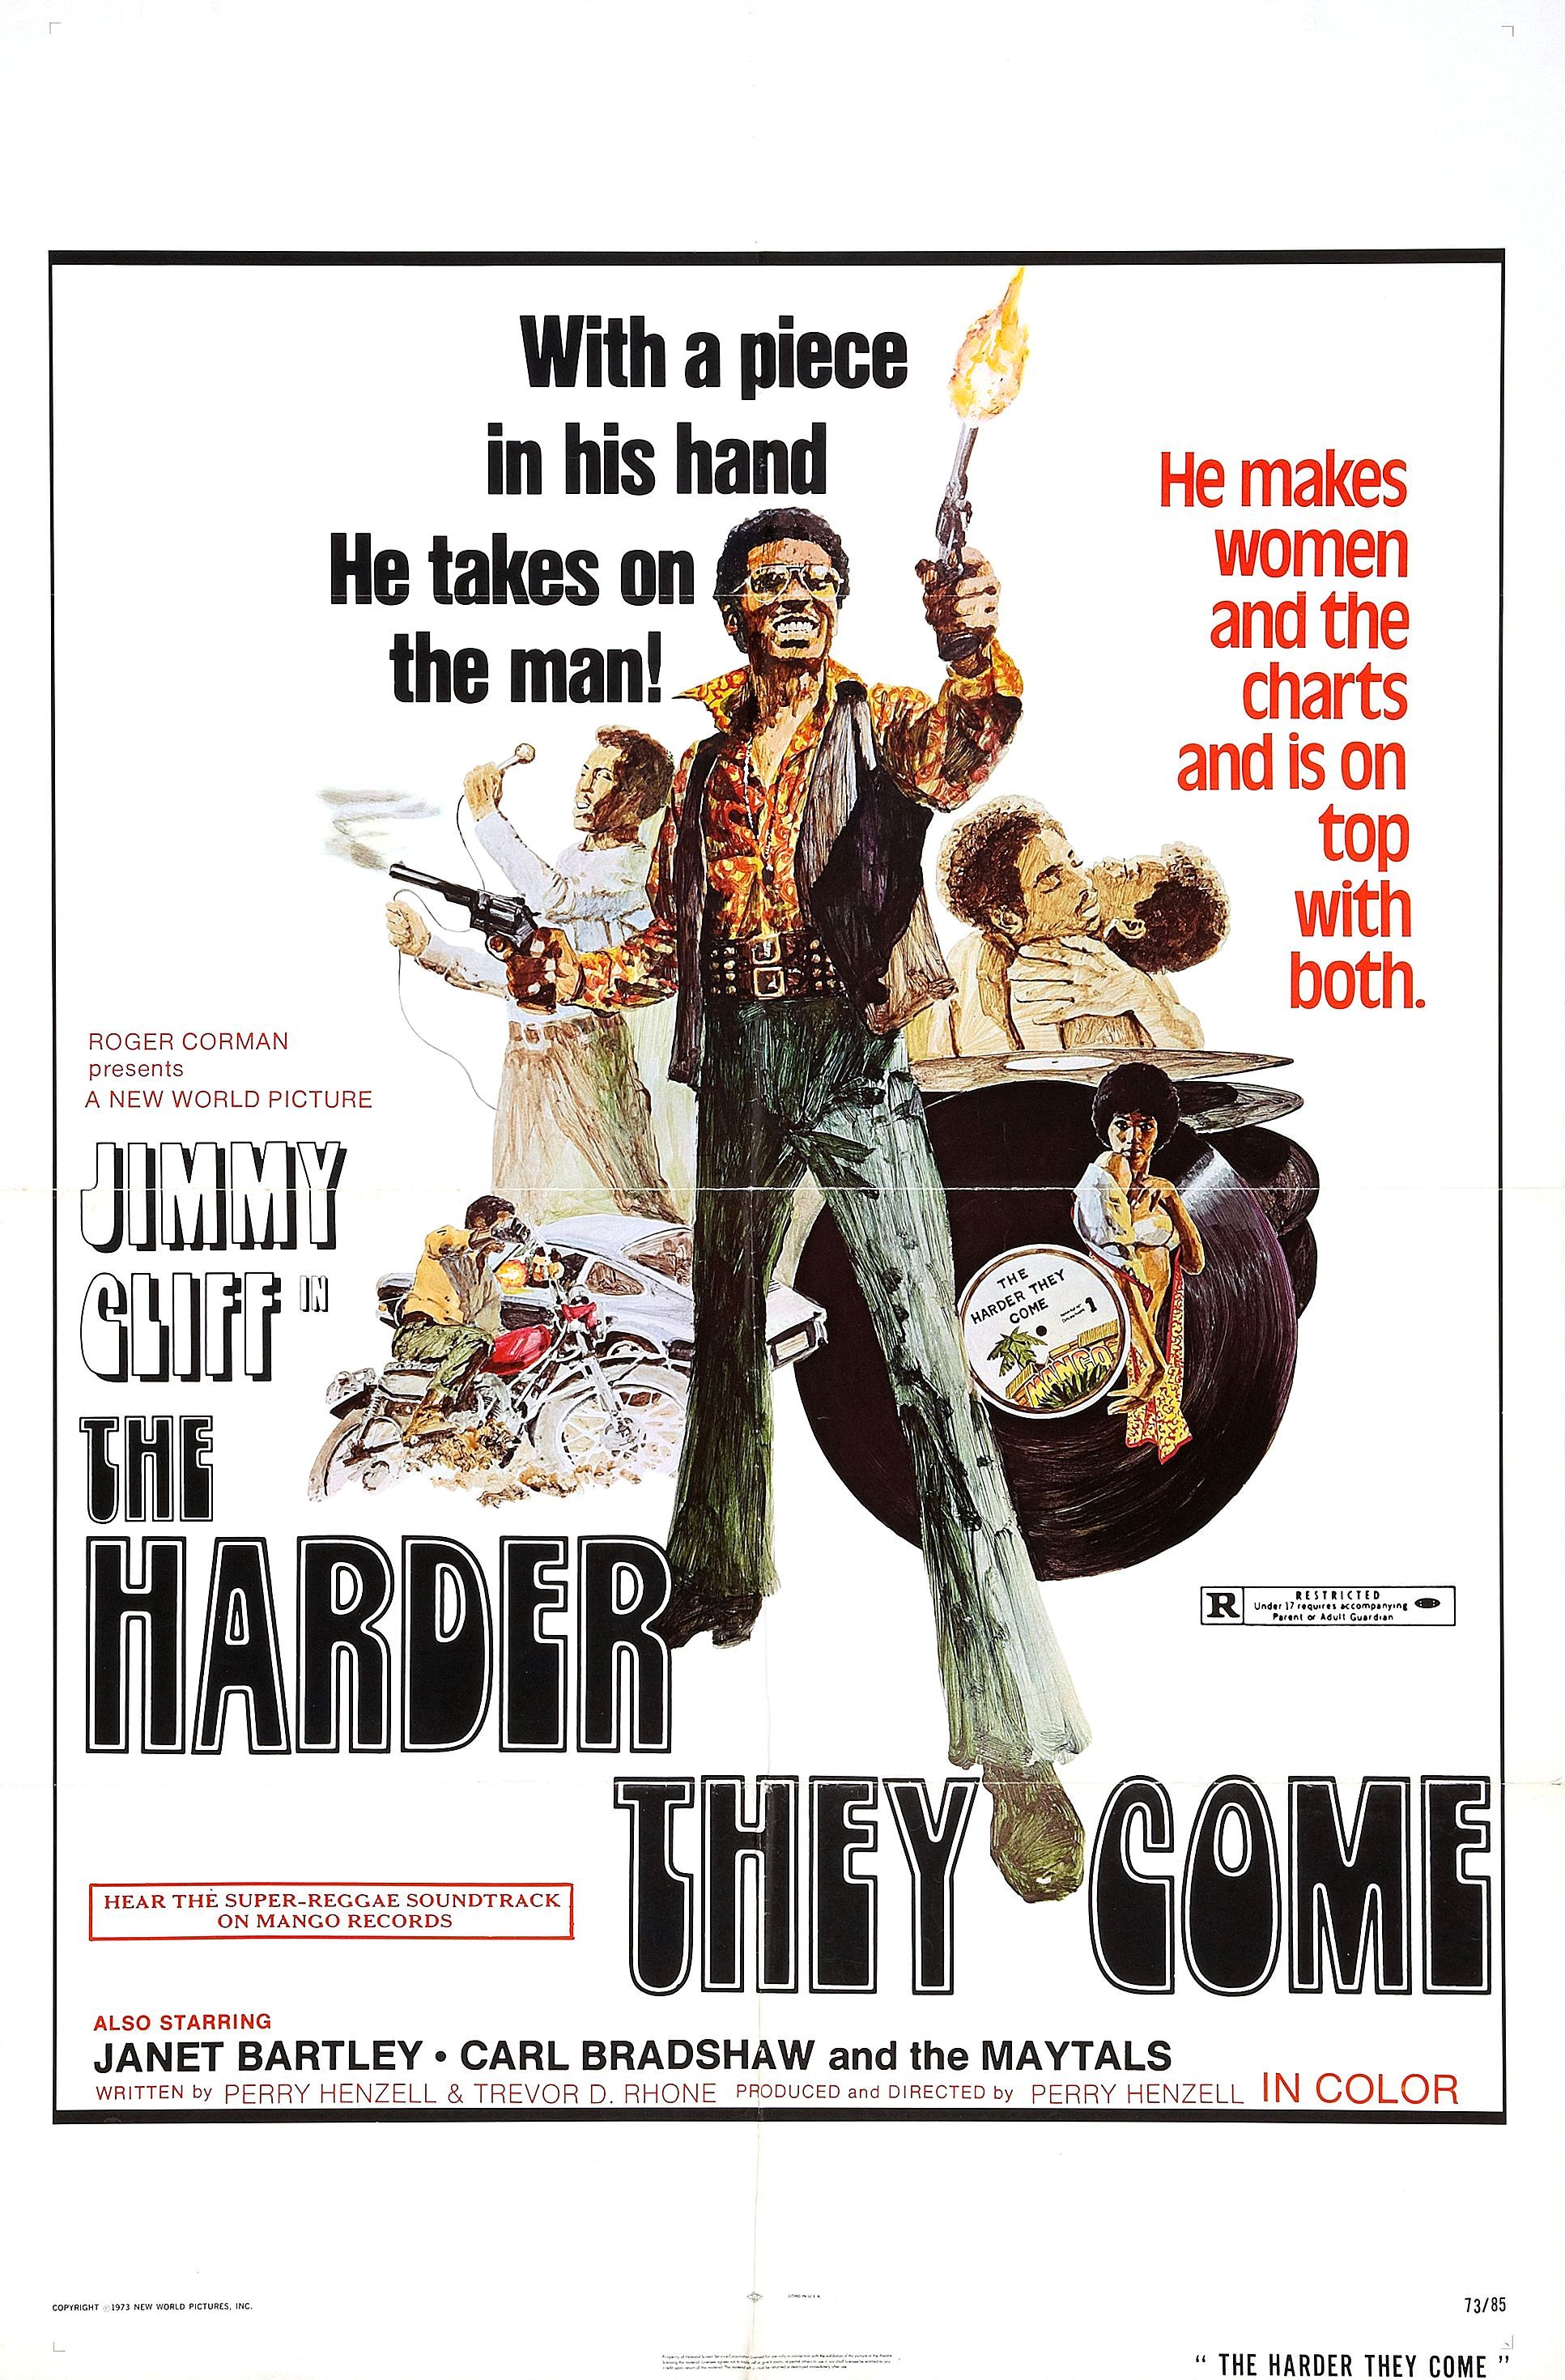 The Harder They Come (1972) starring Jimmy Cliff on DVD on DVD